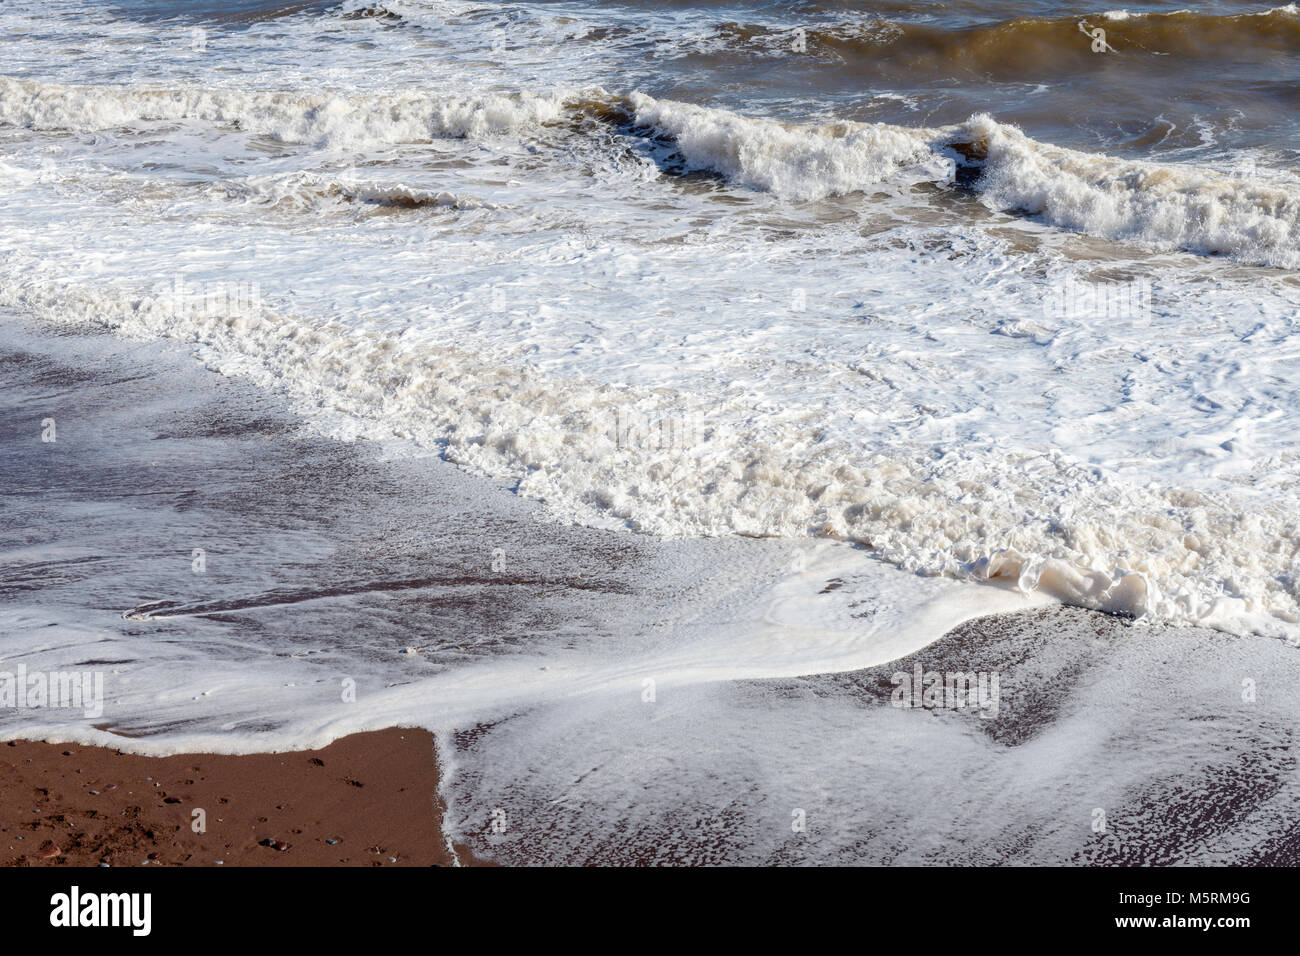 Sea waves and foam breaking on beach at Ness cove Shaldon south Devon UK Stock Photo